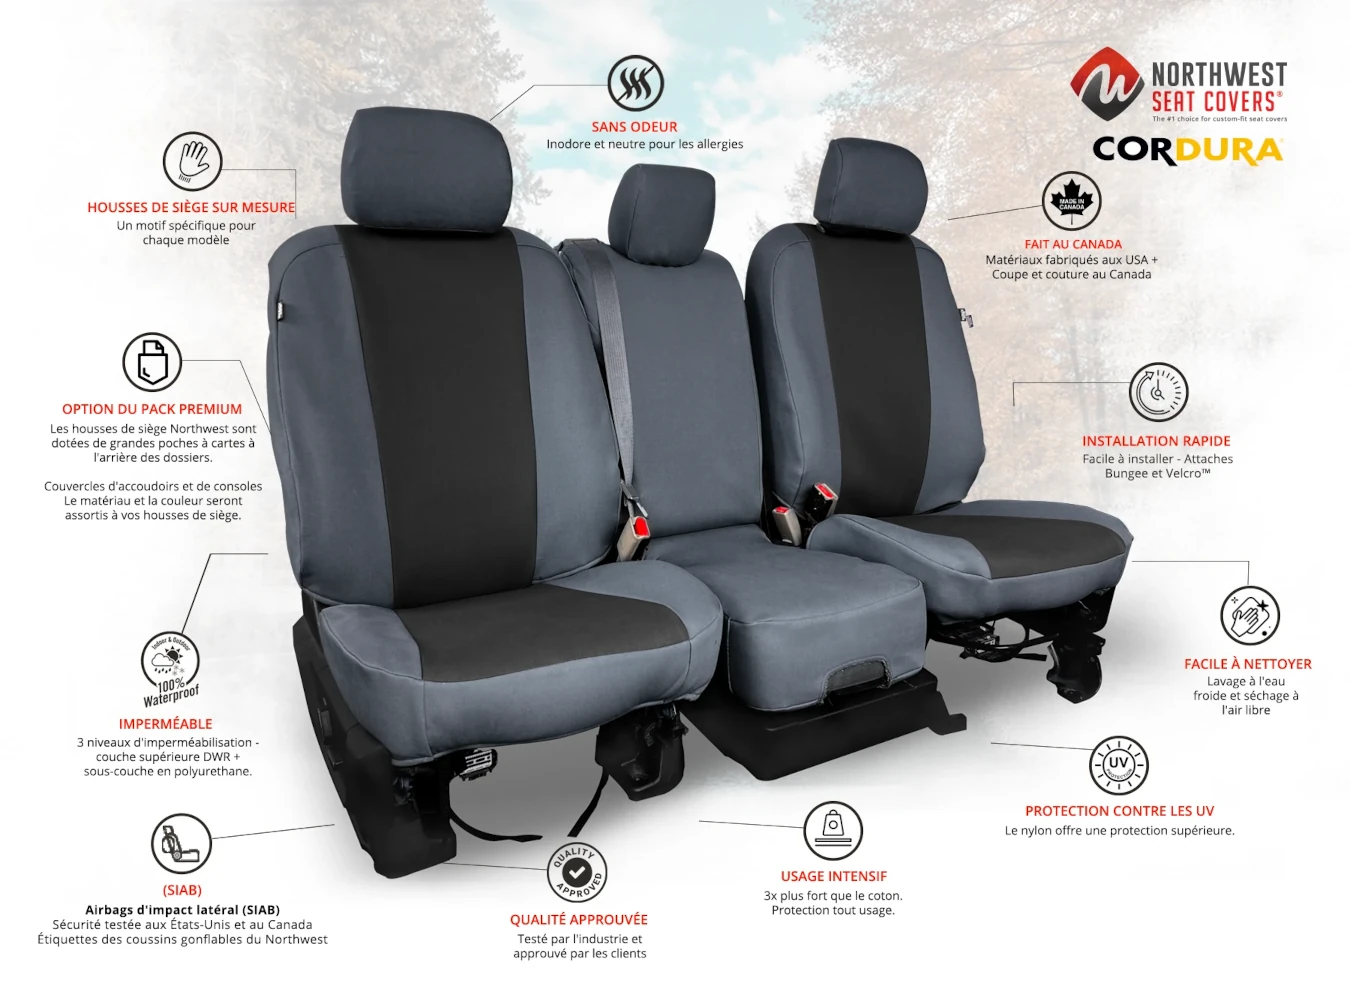 Northwest Seat Covers introducing pro-gard Custom Seat Covers